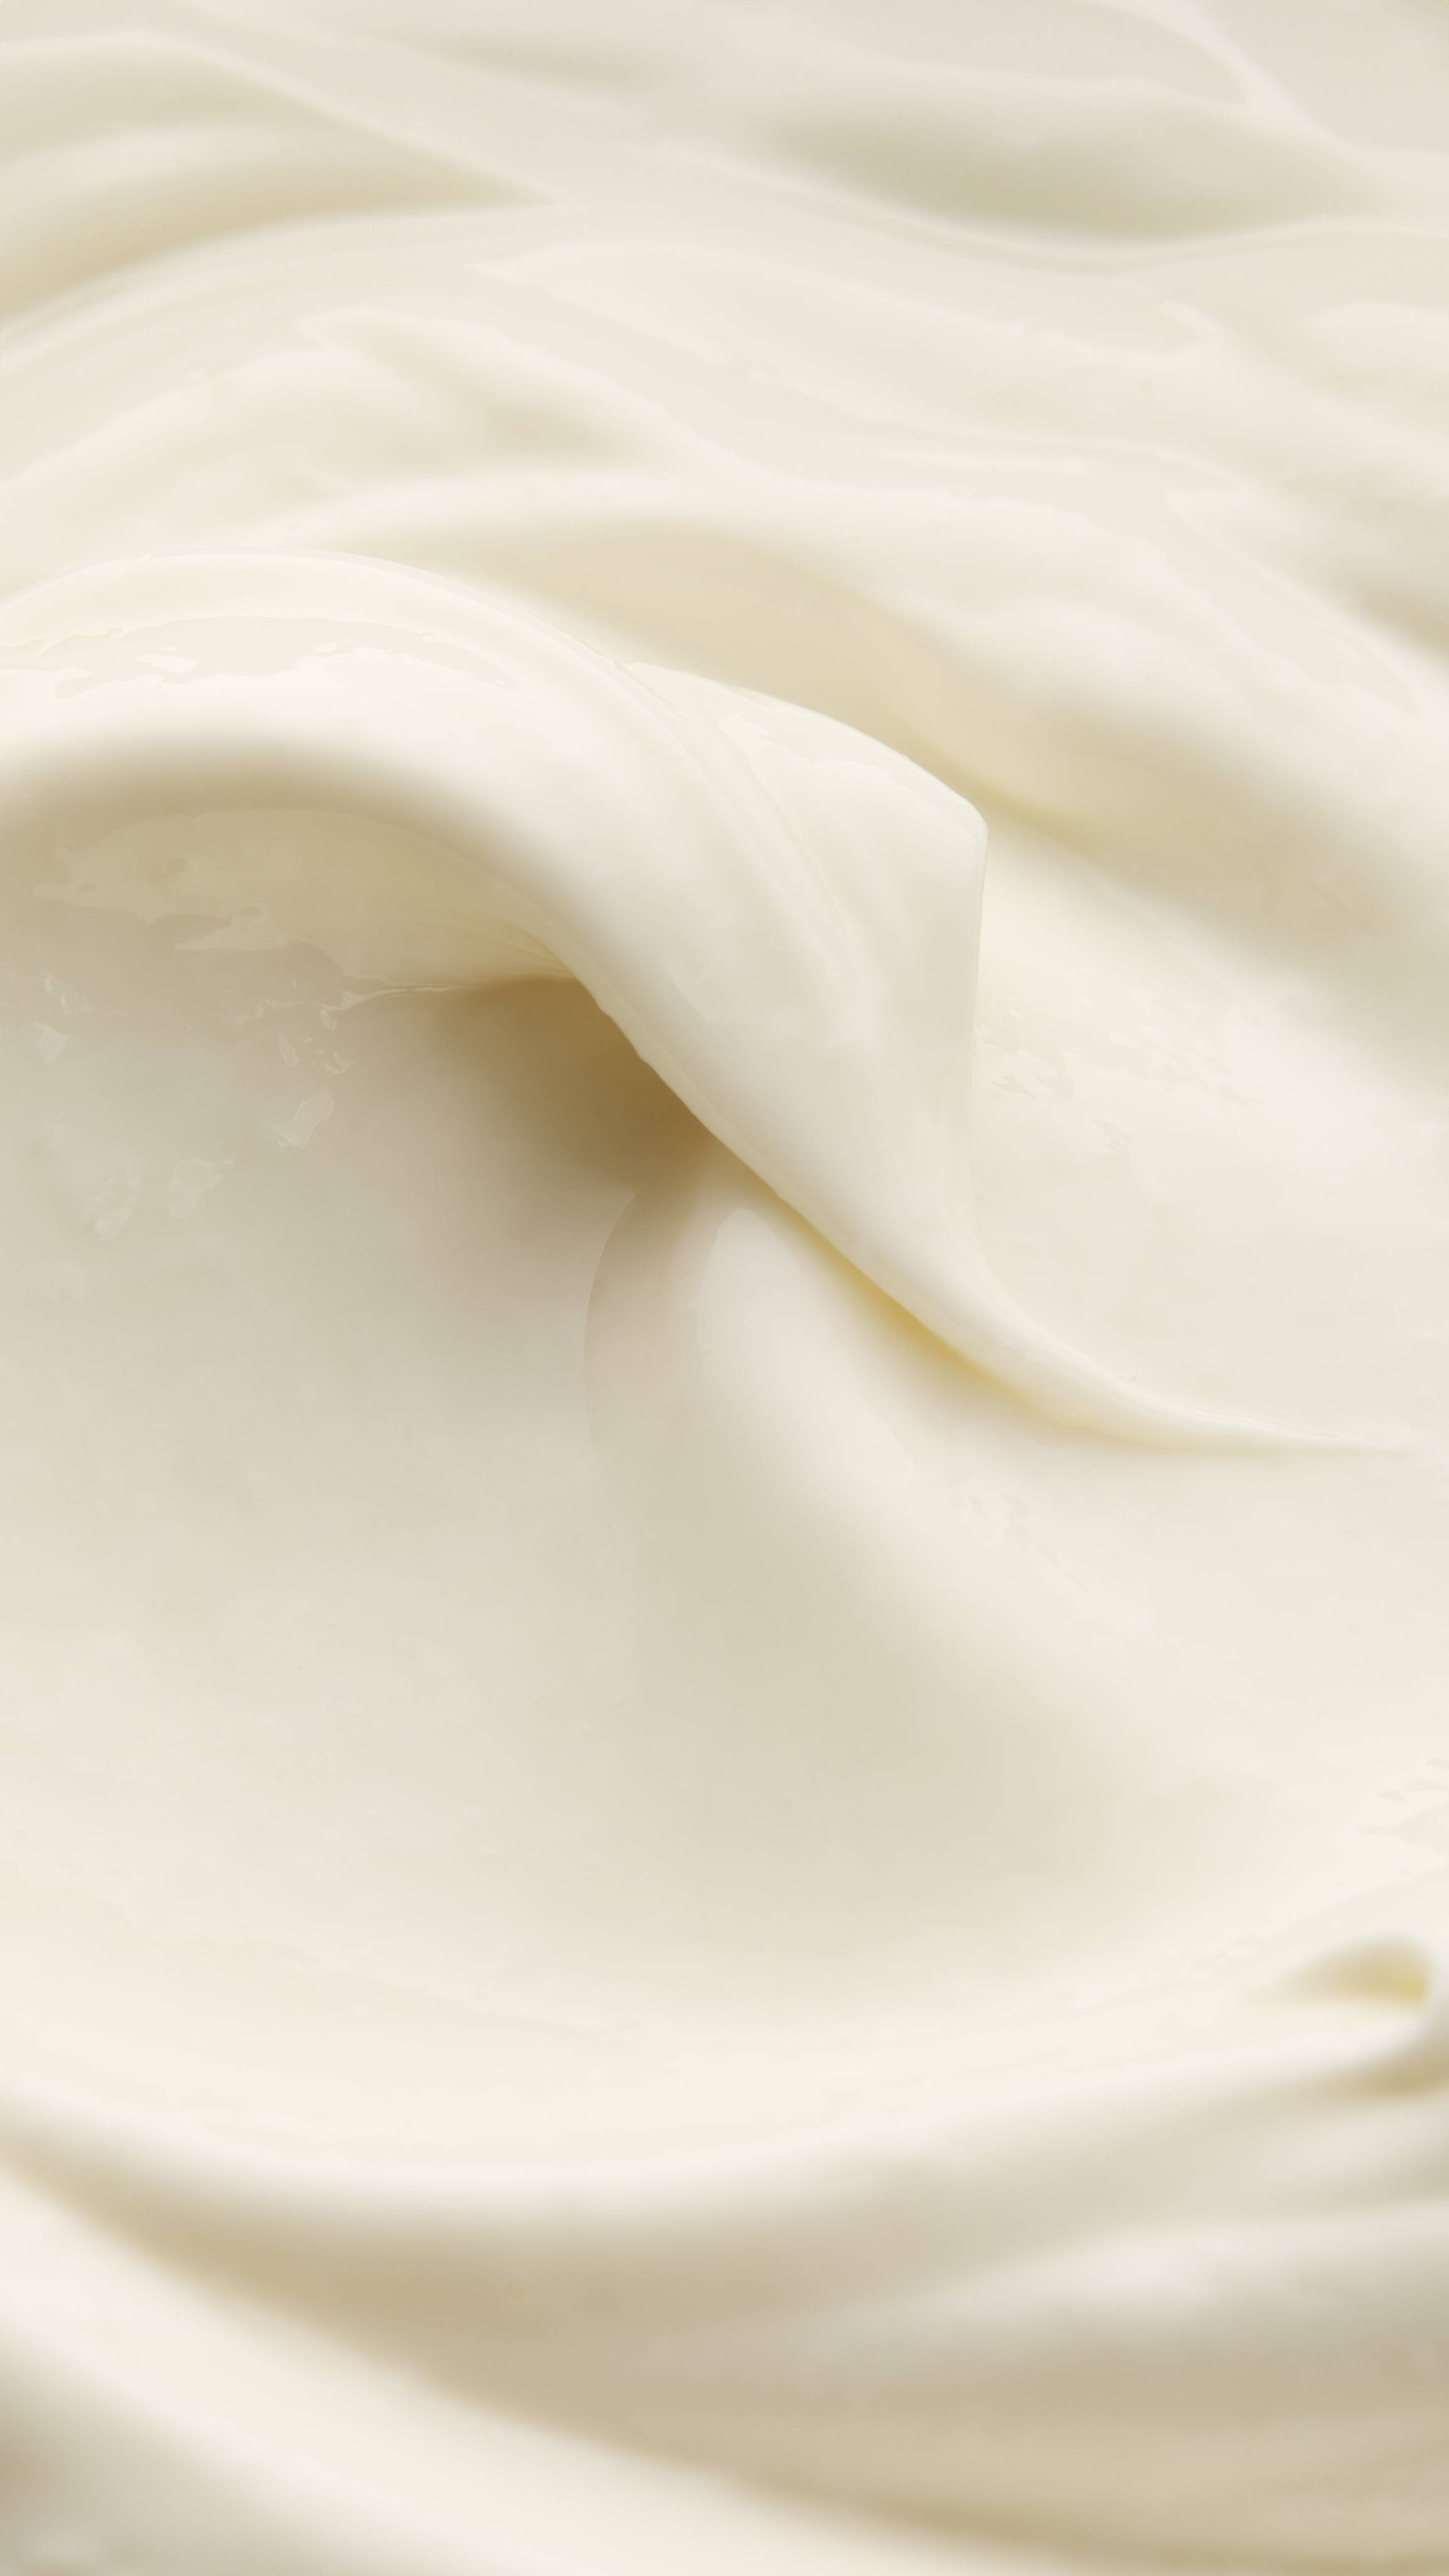 A super-close up image of the Cosmetic Lad self-preserving moisturiser showing the silky, soft texture of the product. 